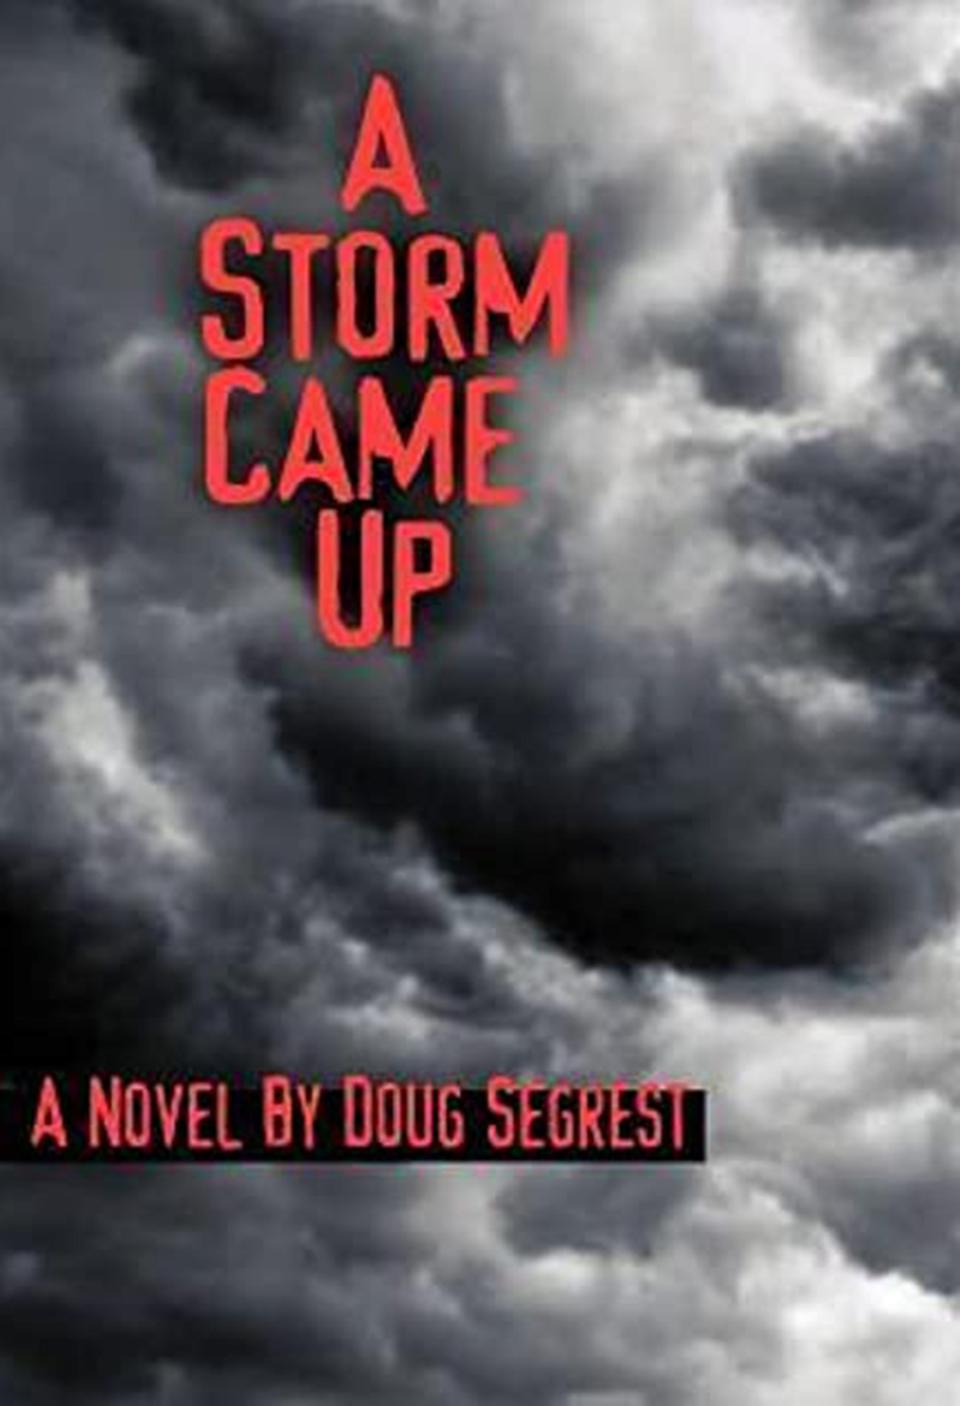 Doug Segrest's novel "A Storm Came Up" was developed into a play at the Wetumpka Depot.